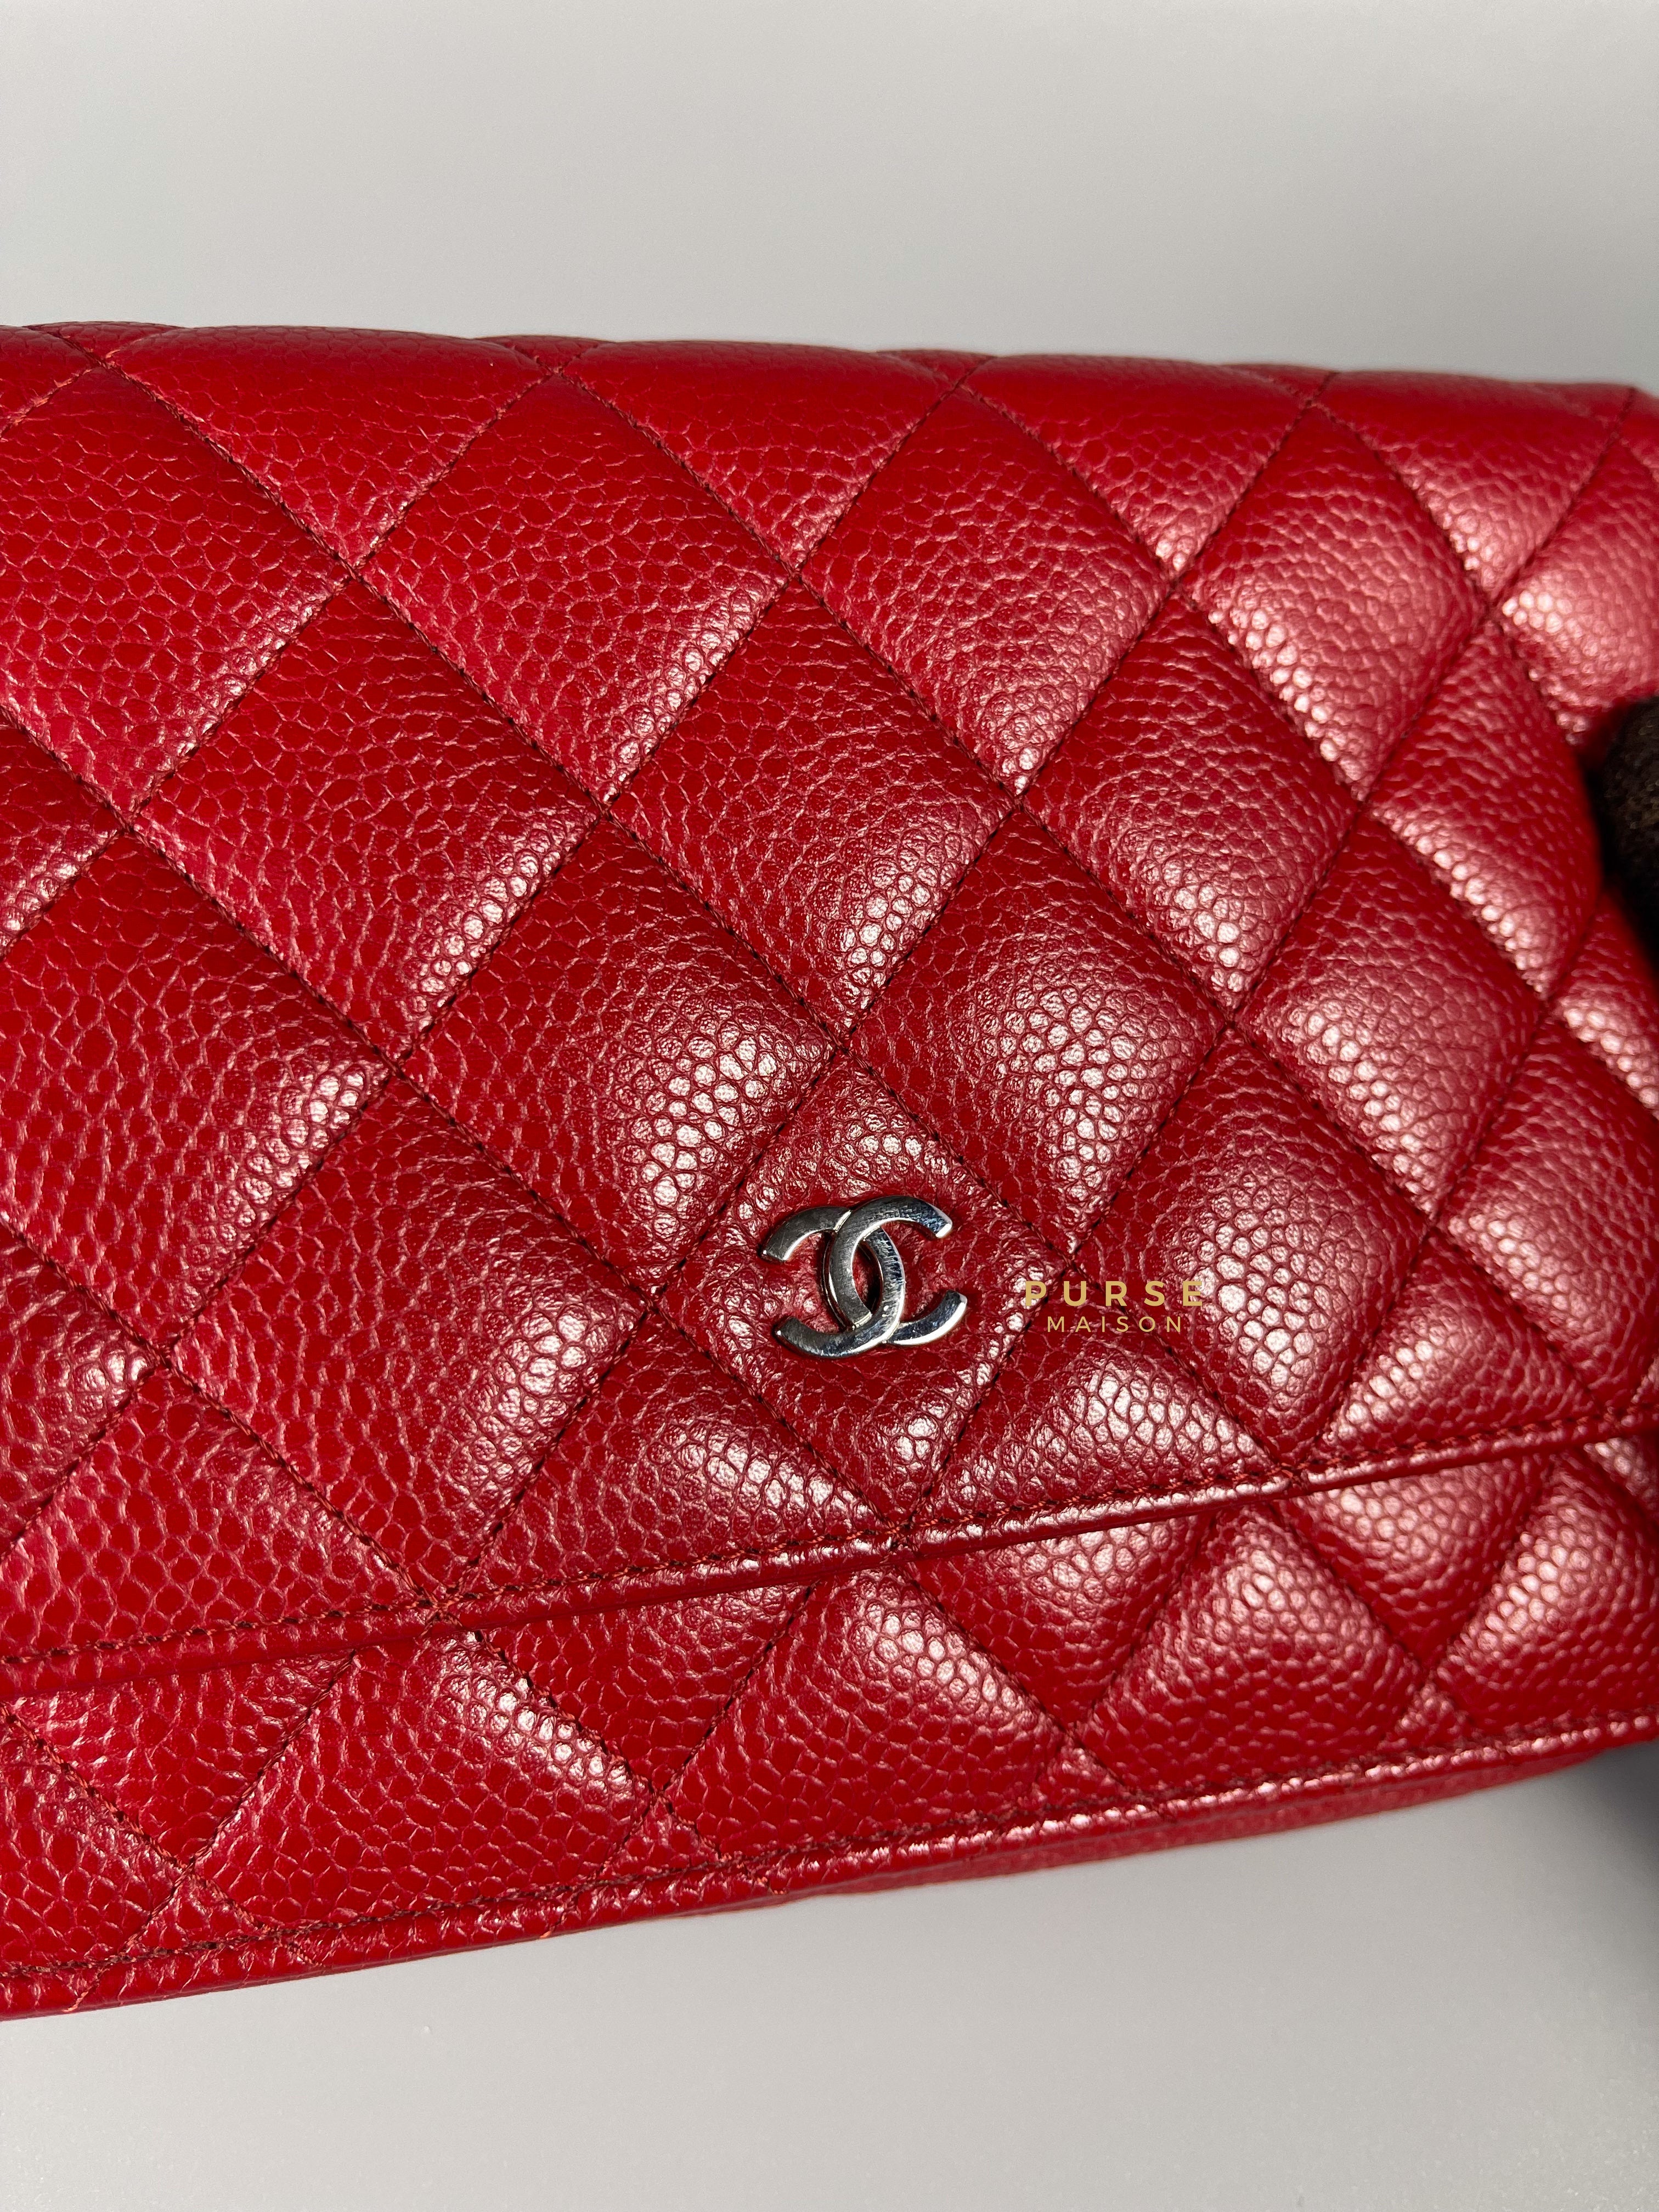 Chanel Wallet on Chain in Red Caviar Canvas and Silver Hardware Series 14 | Purse Maison Luxury Bags Shop